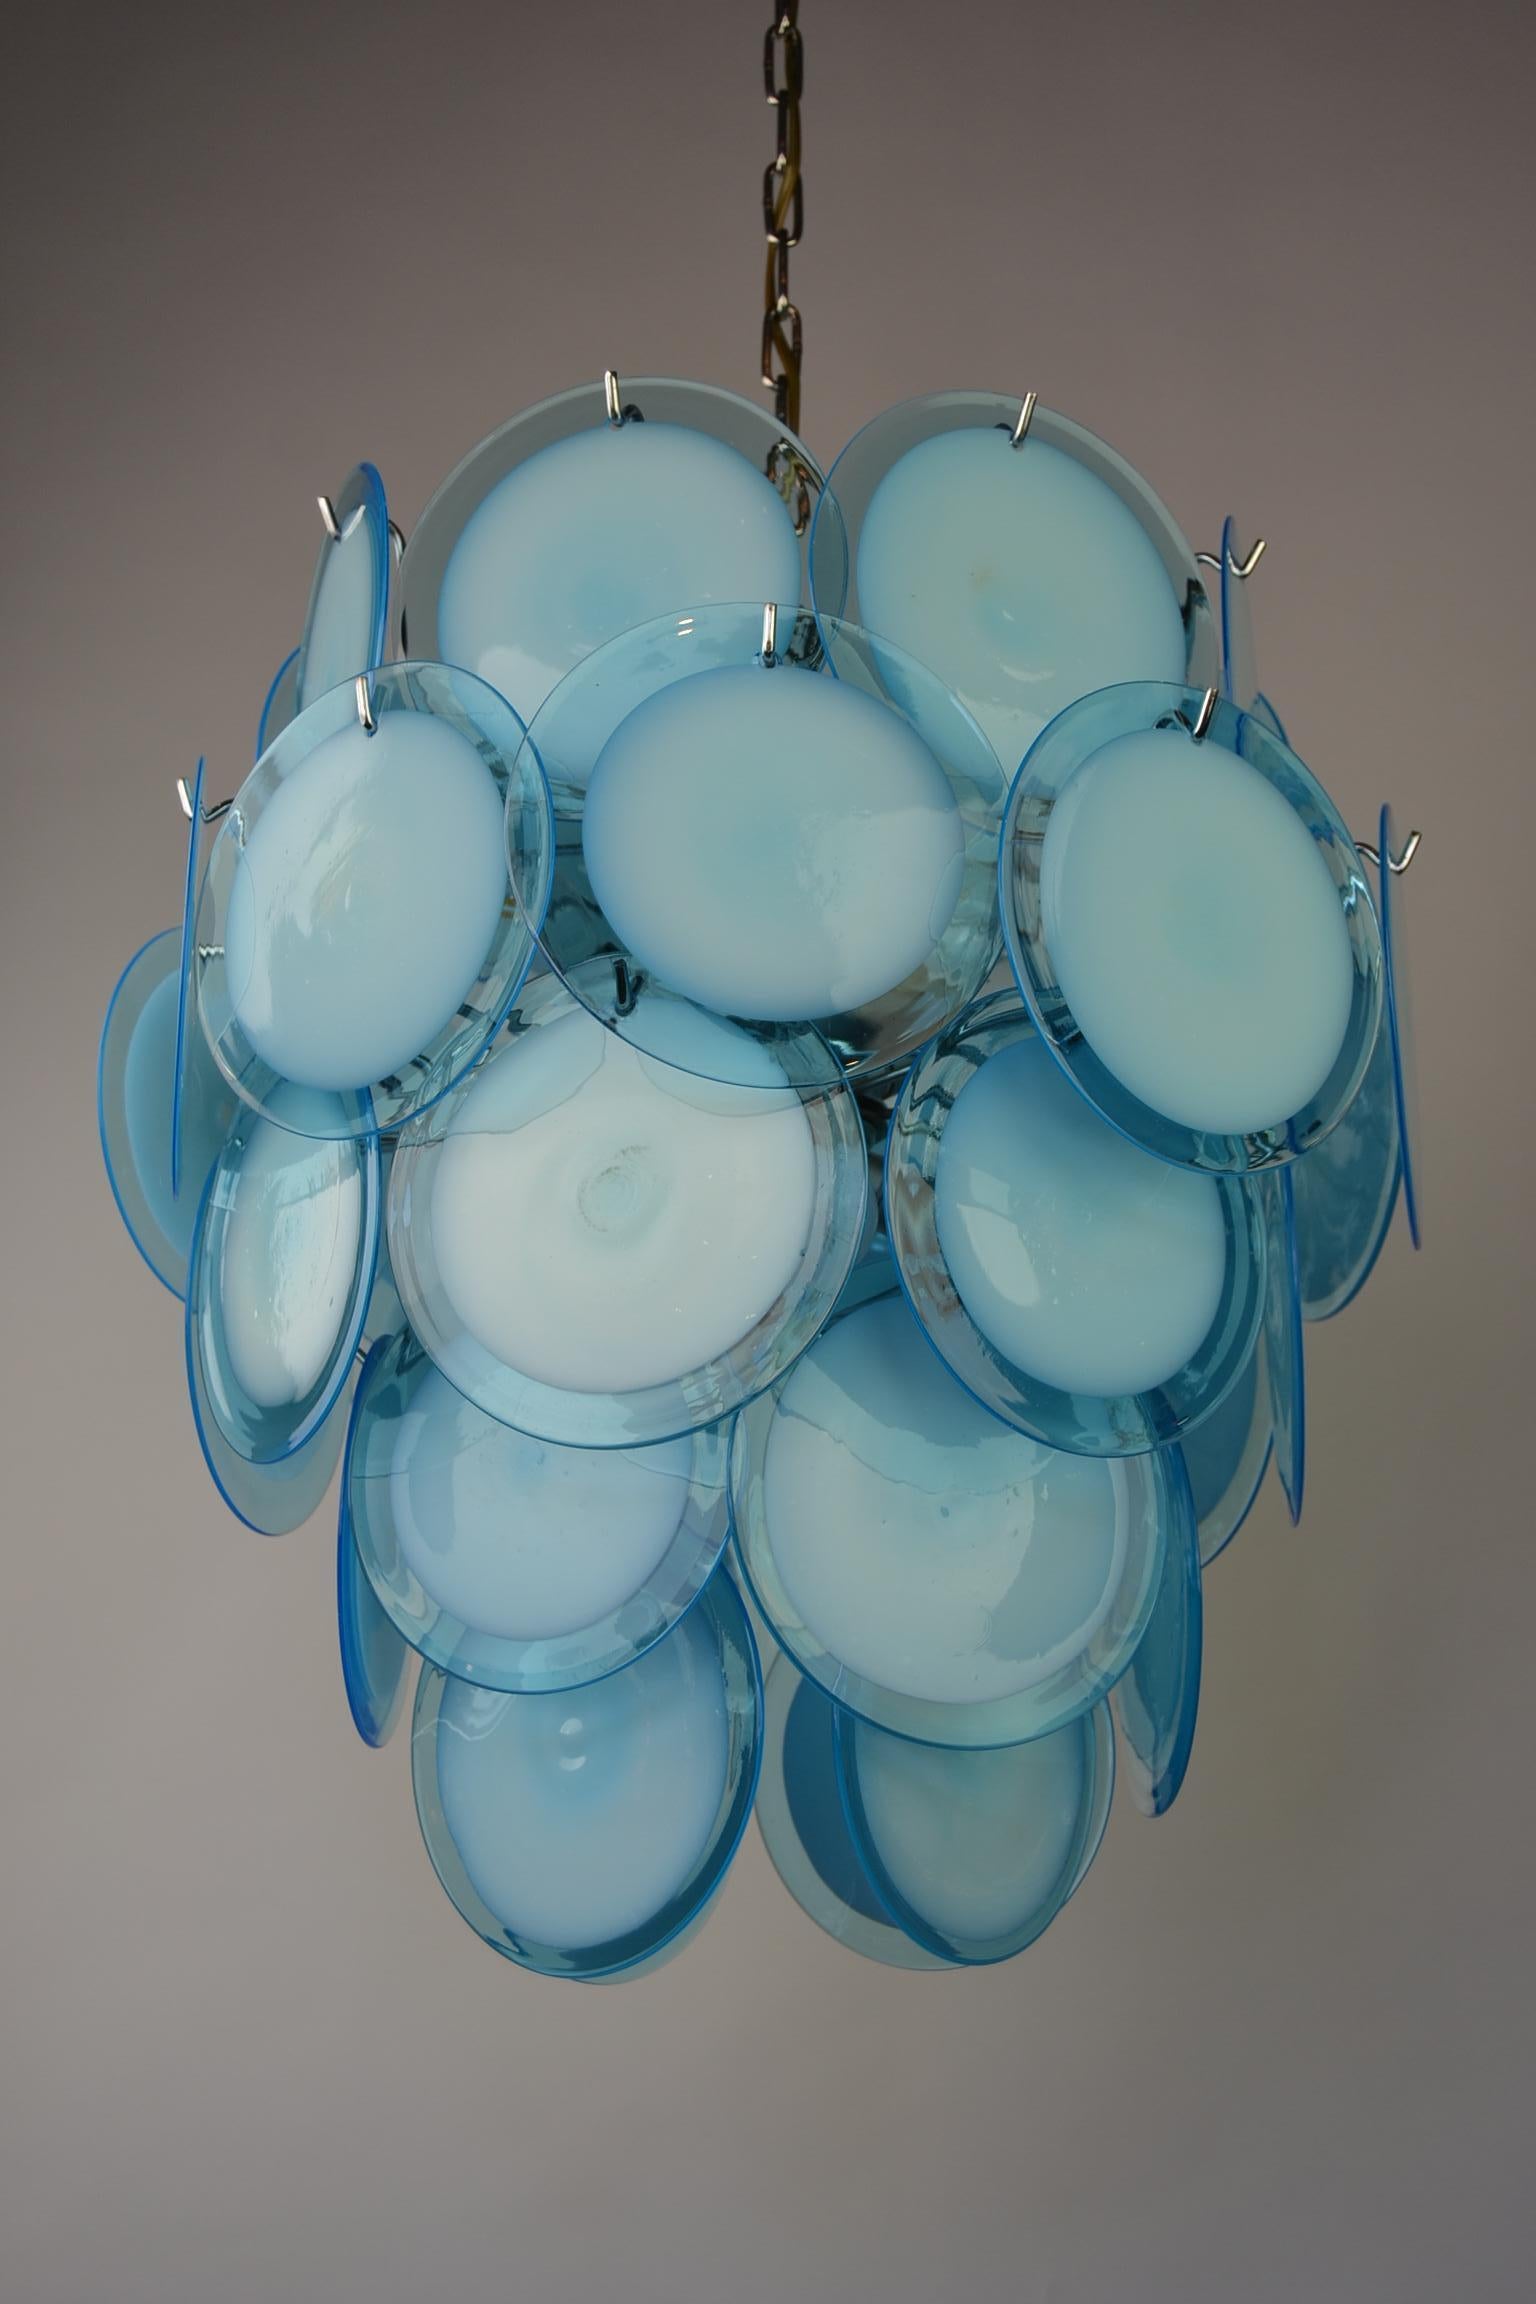 Blue Disc Murano Glass Chandelier. 
This large Italian Chandelier has a chrome frame on a chain,  eight light bulbs with E14 fitting and 36 handblown blue glass discs. 
The 36 discs are placed in 5 layers. 
The chrome of this large modern chandelier